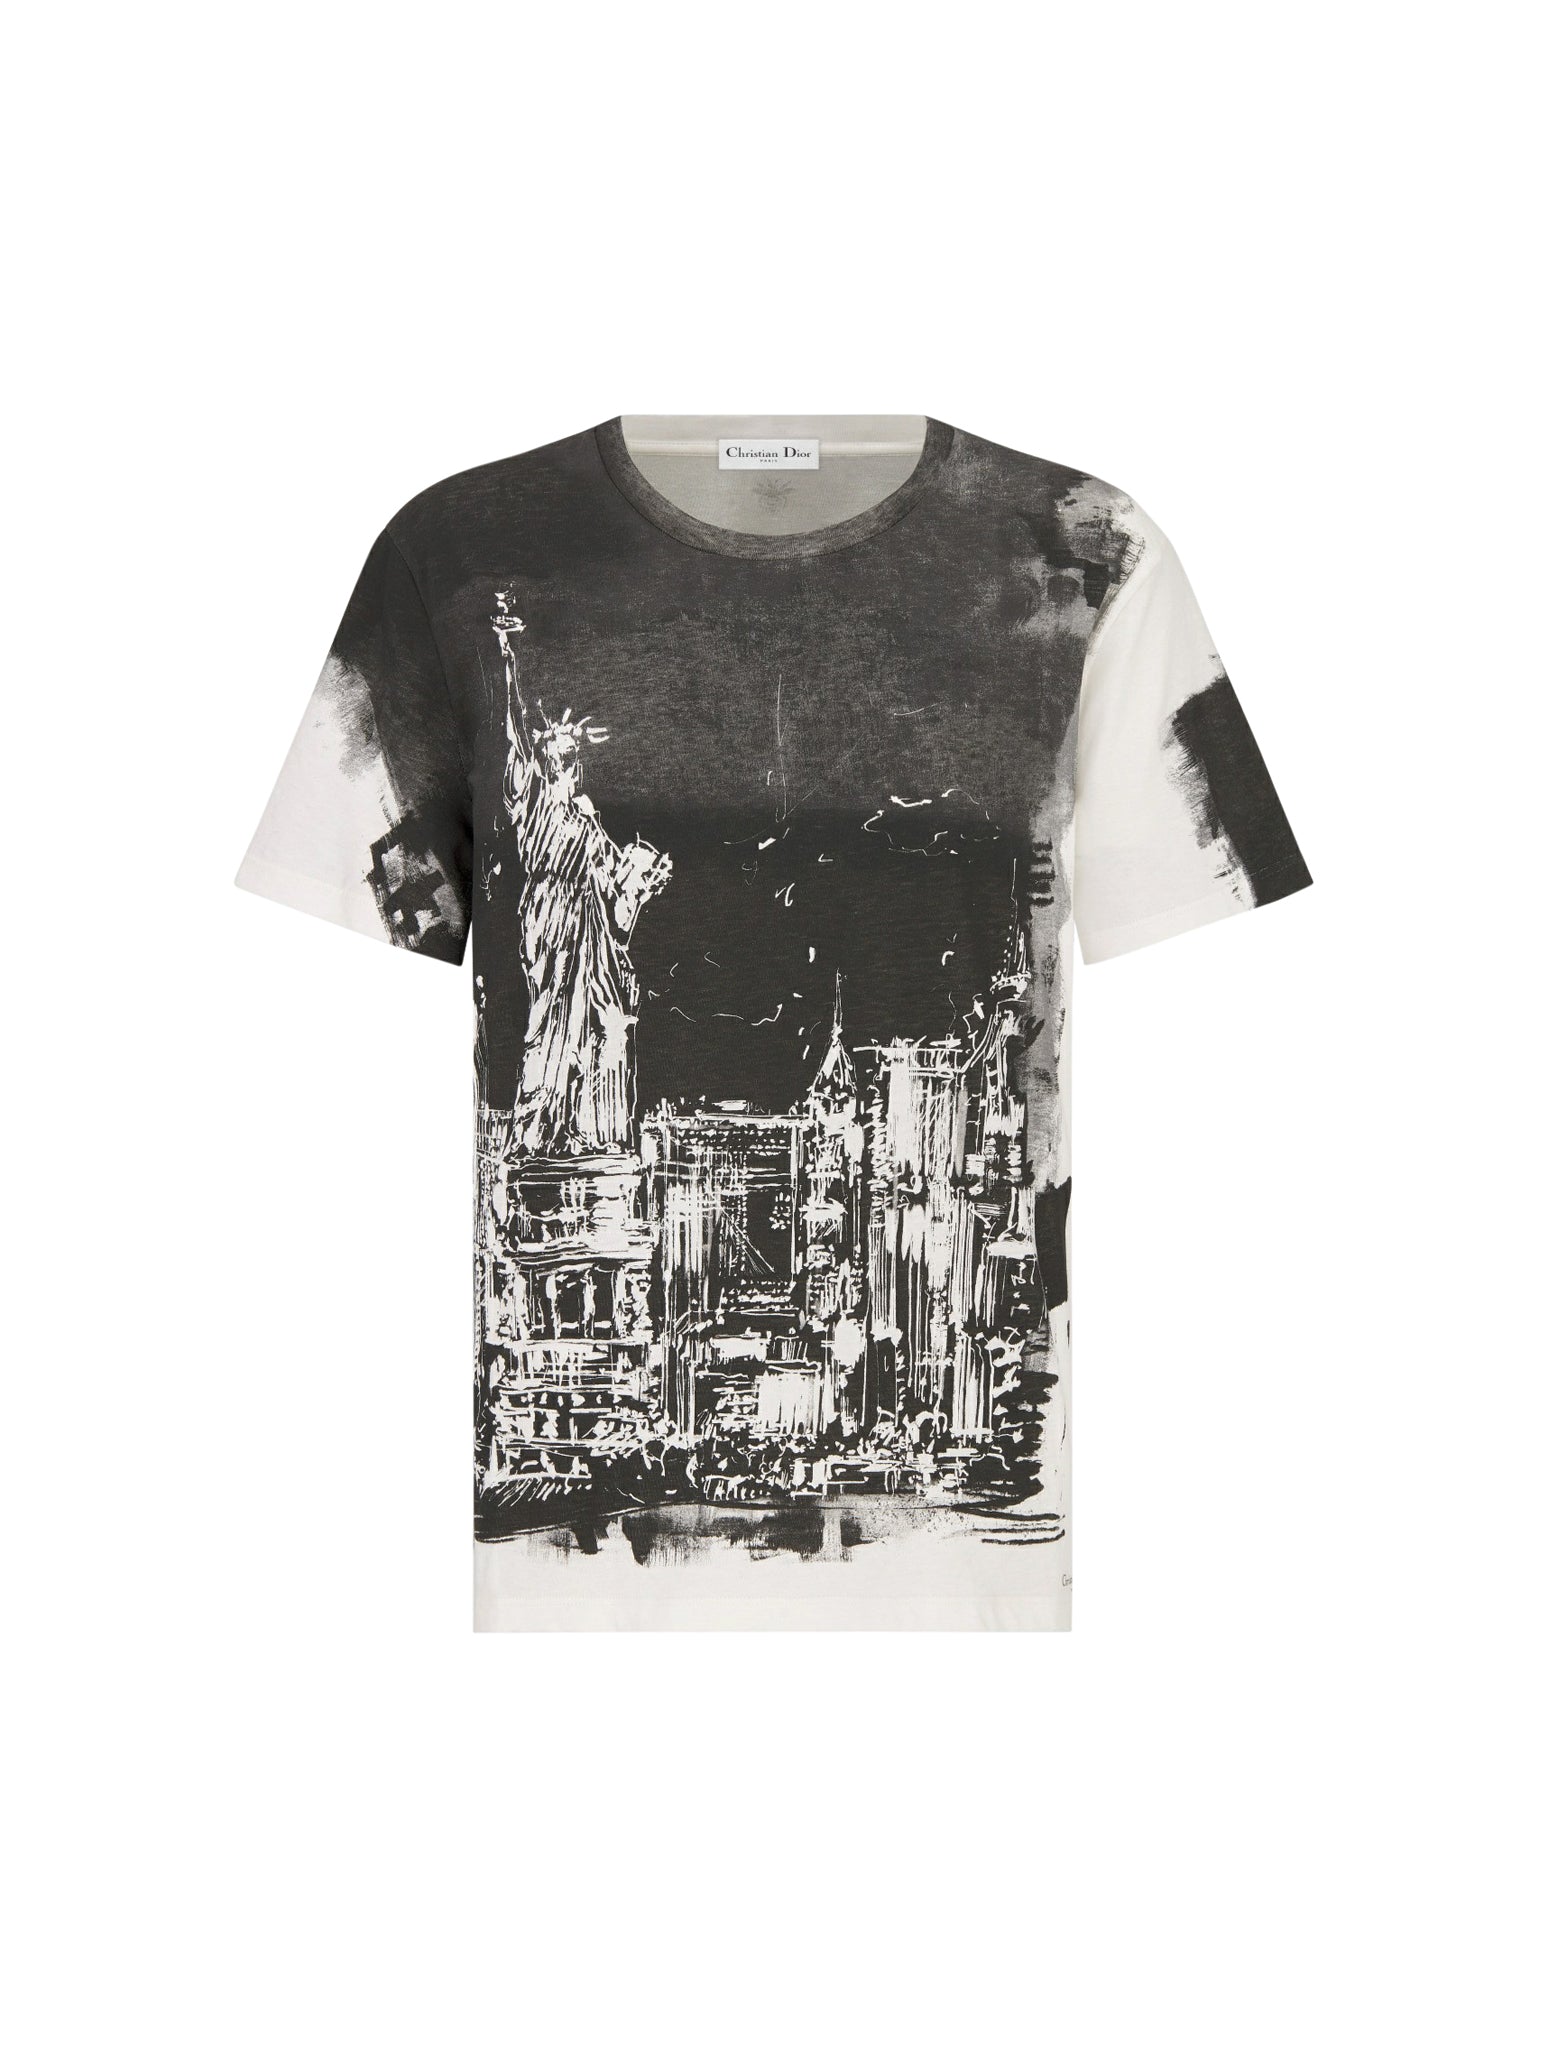 T-shirt in black and white cotton and linen jersey with New York motif